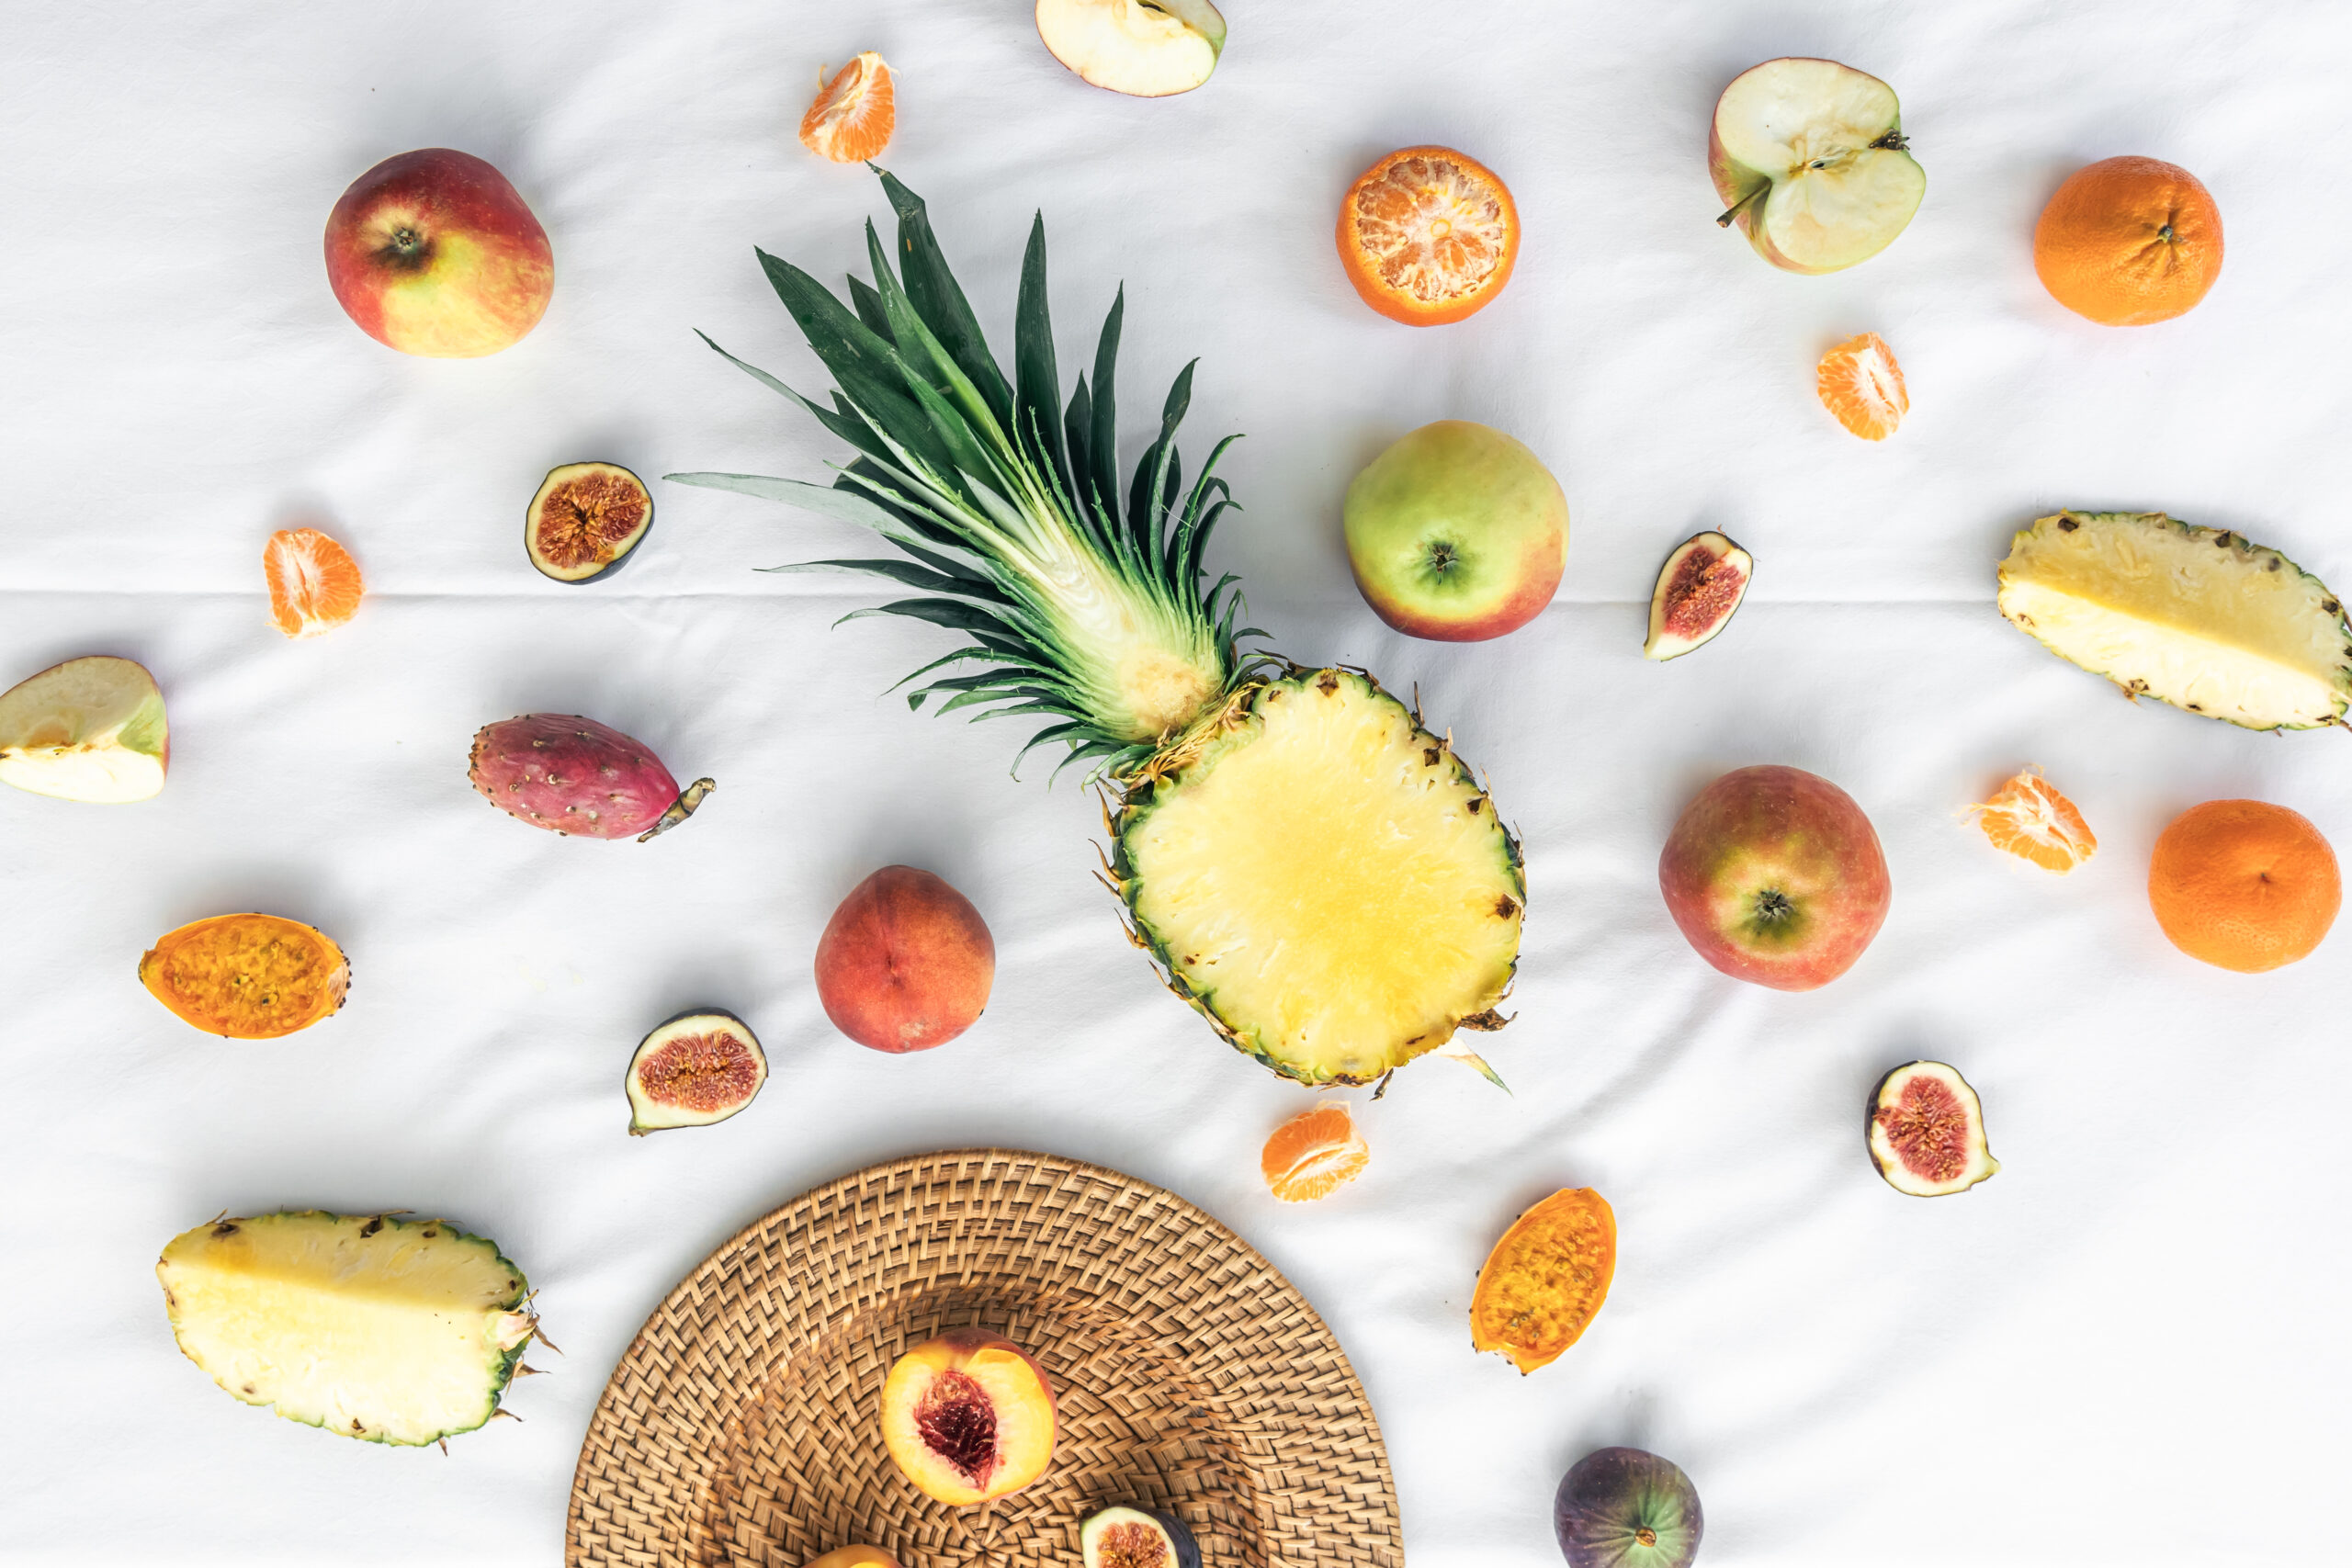 Fruit background with cut pineapple and other exotic fruits.